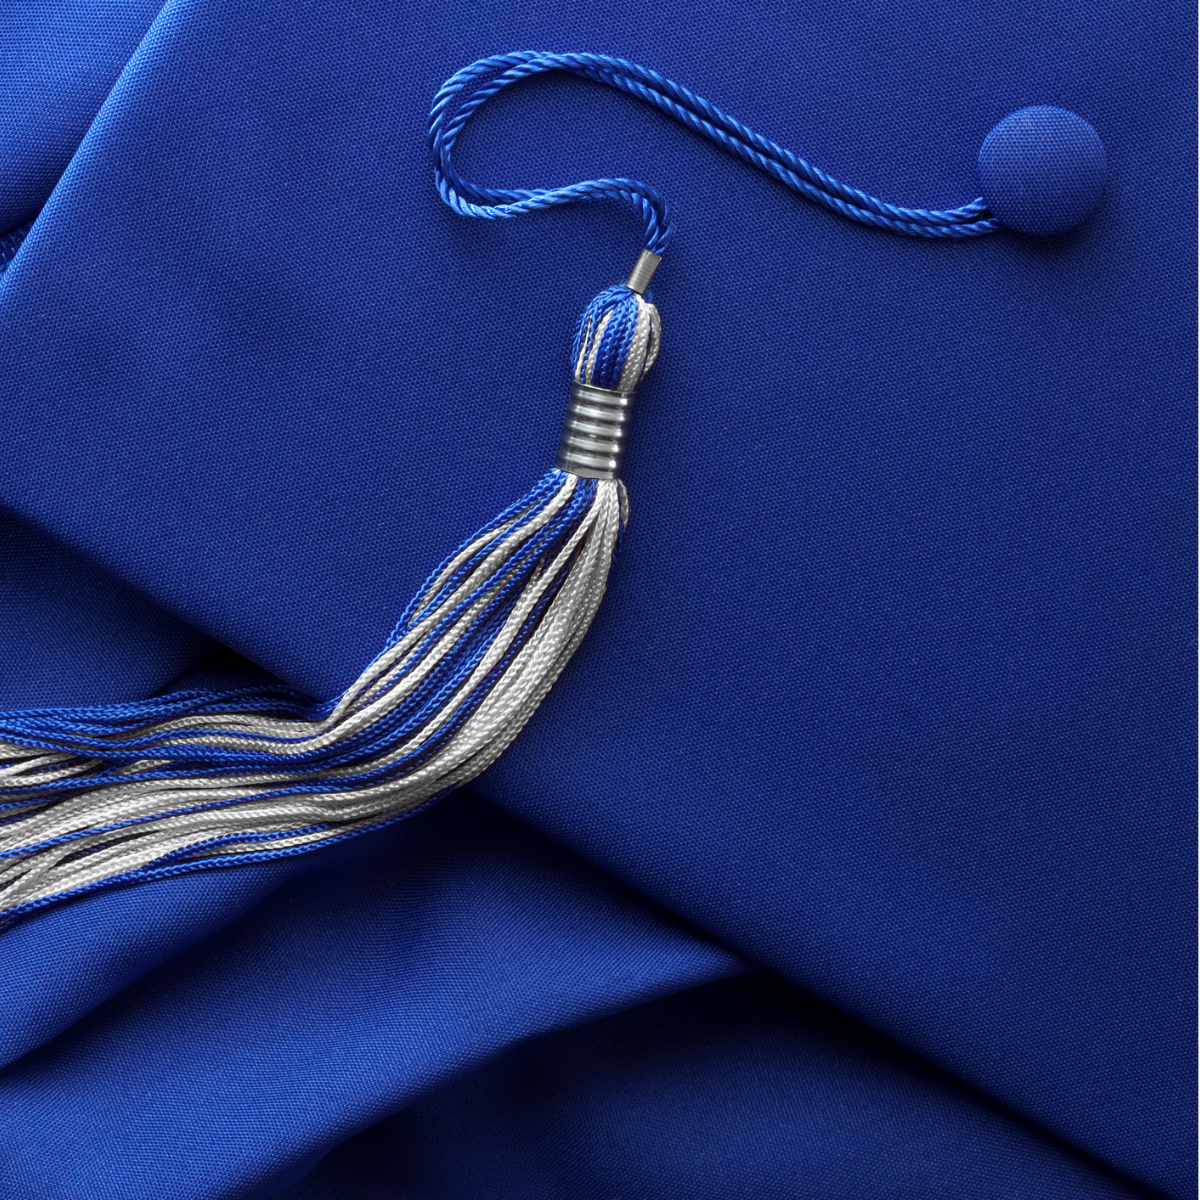 CAP AND GOWN